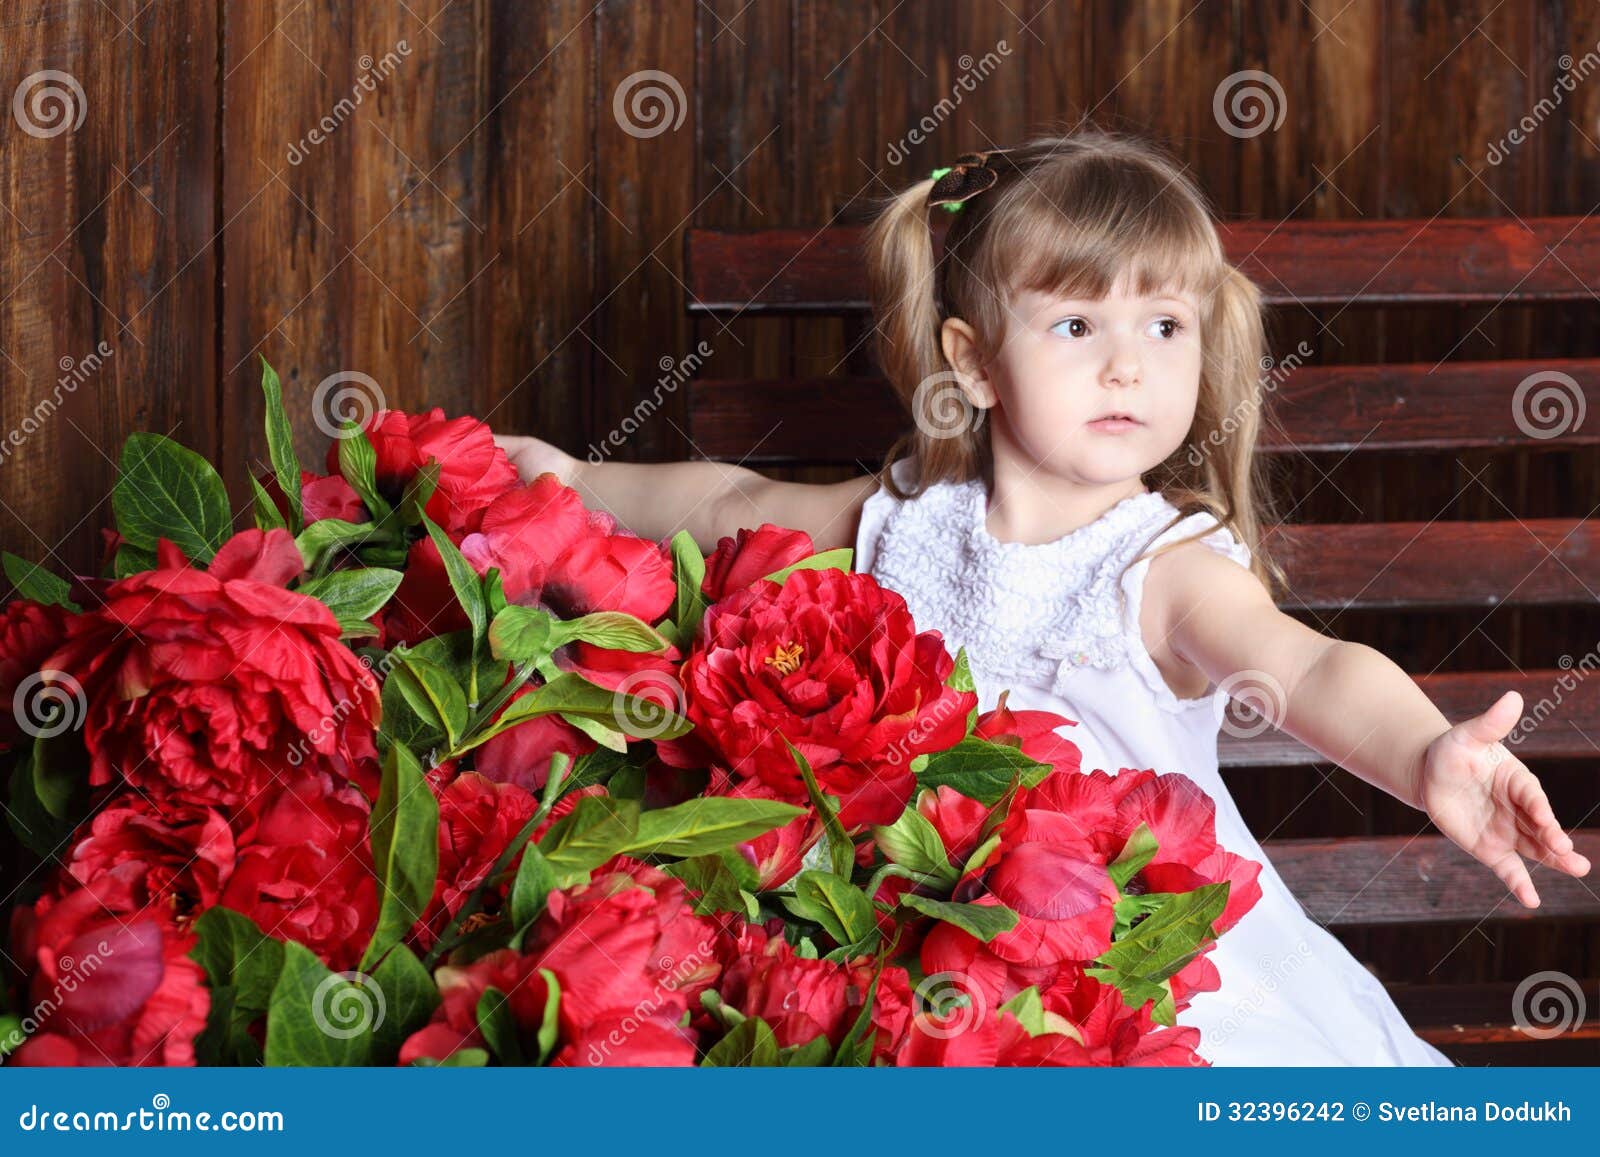 red dress with little white flowers